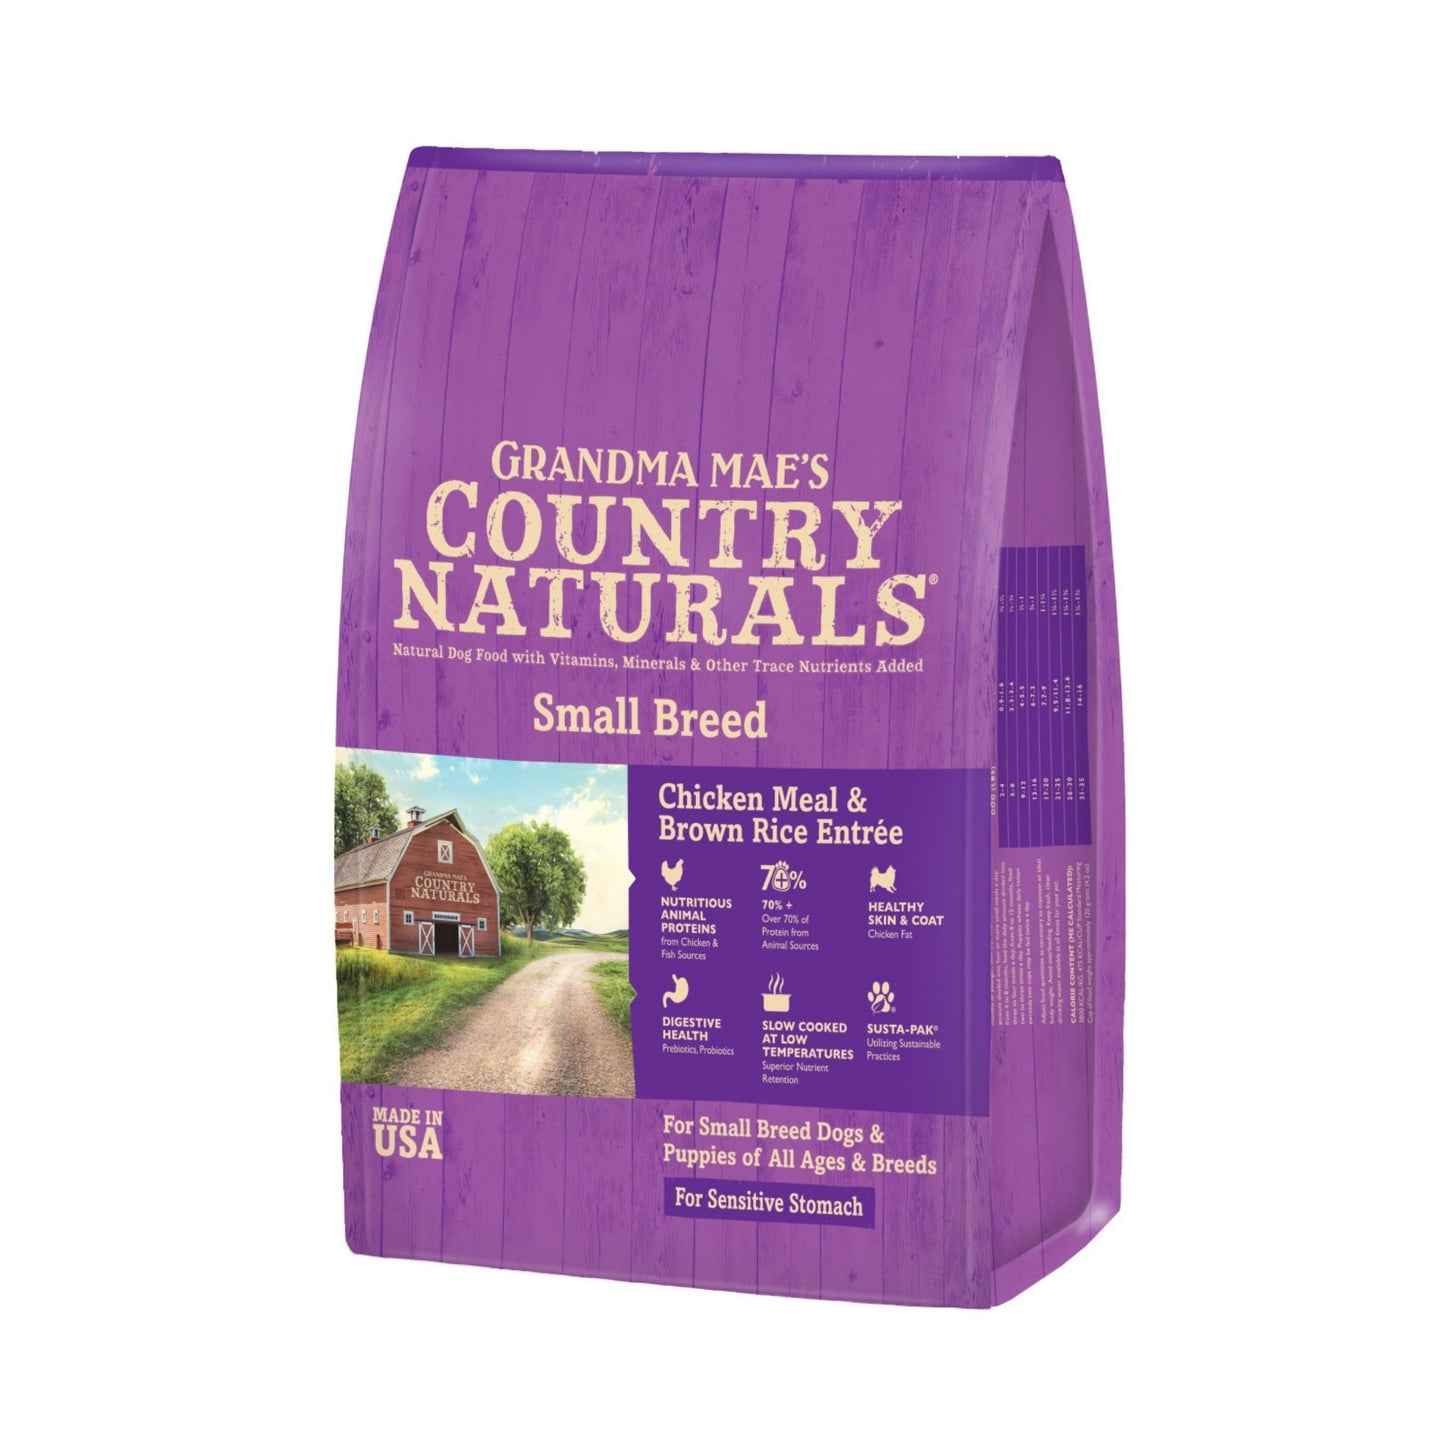 Grandma Mae's Country Naturals Small Breed Sensitive Stomach Dry Dog Food Chicken & Rice, 1ea/4 lb